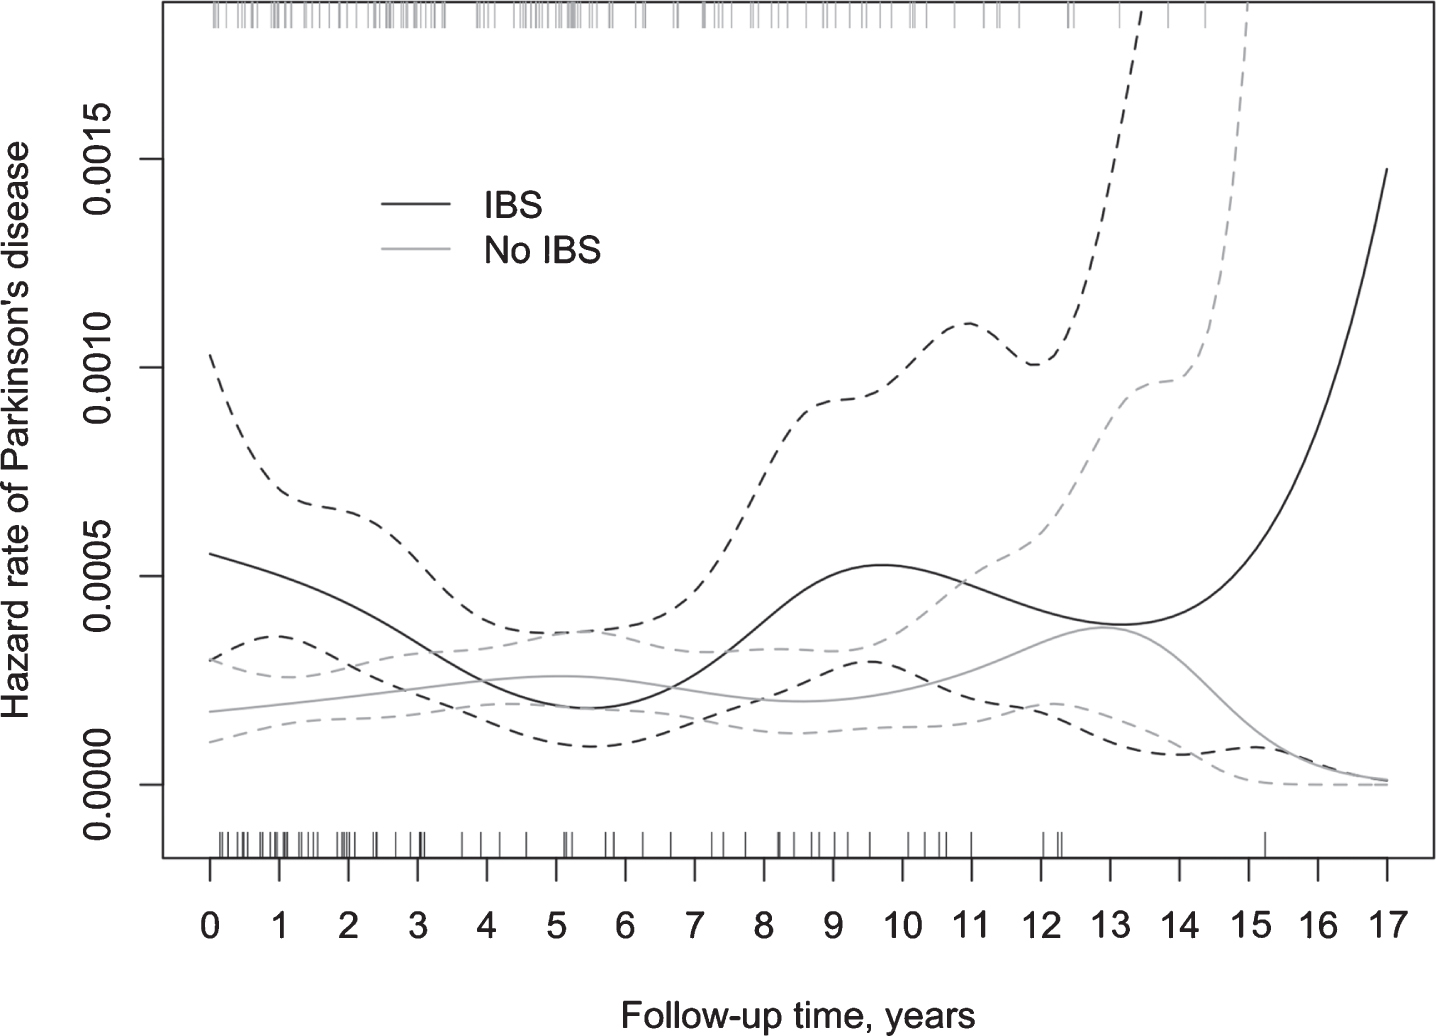 Incidence of PD (spikes) in IBS+ and IBS–subjects during the follow-up and the corresponding hazard rate, including 95% confidence intervals.